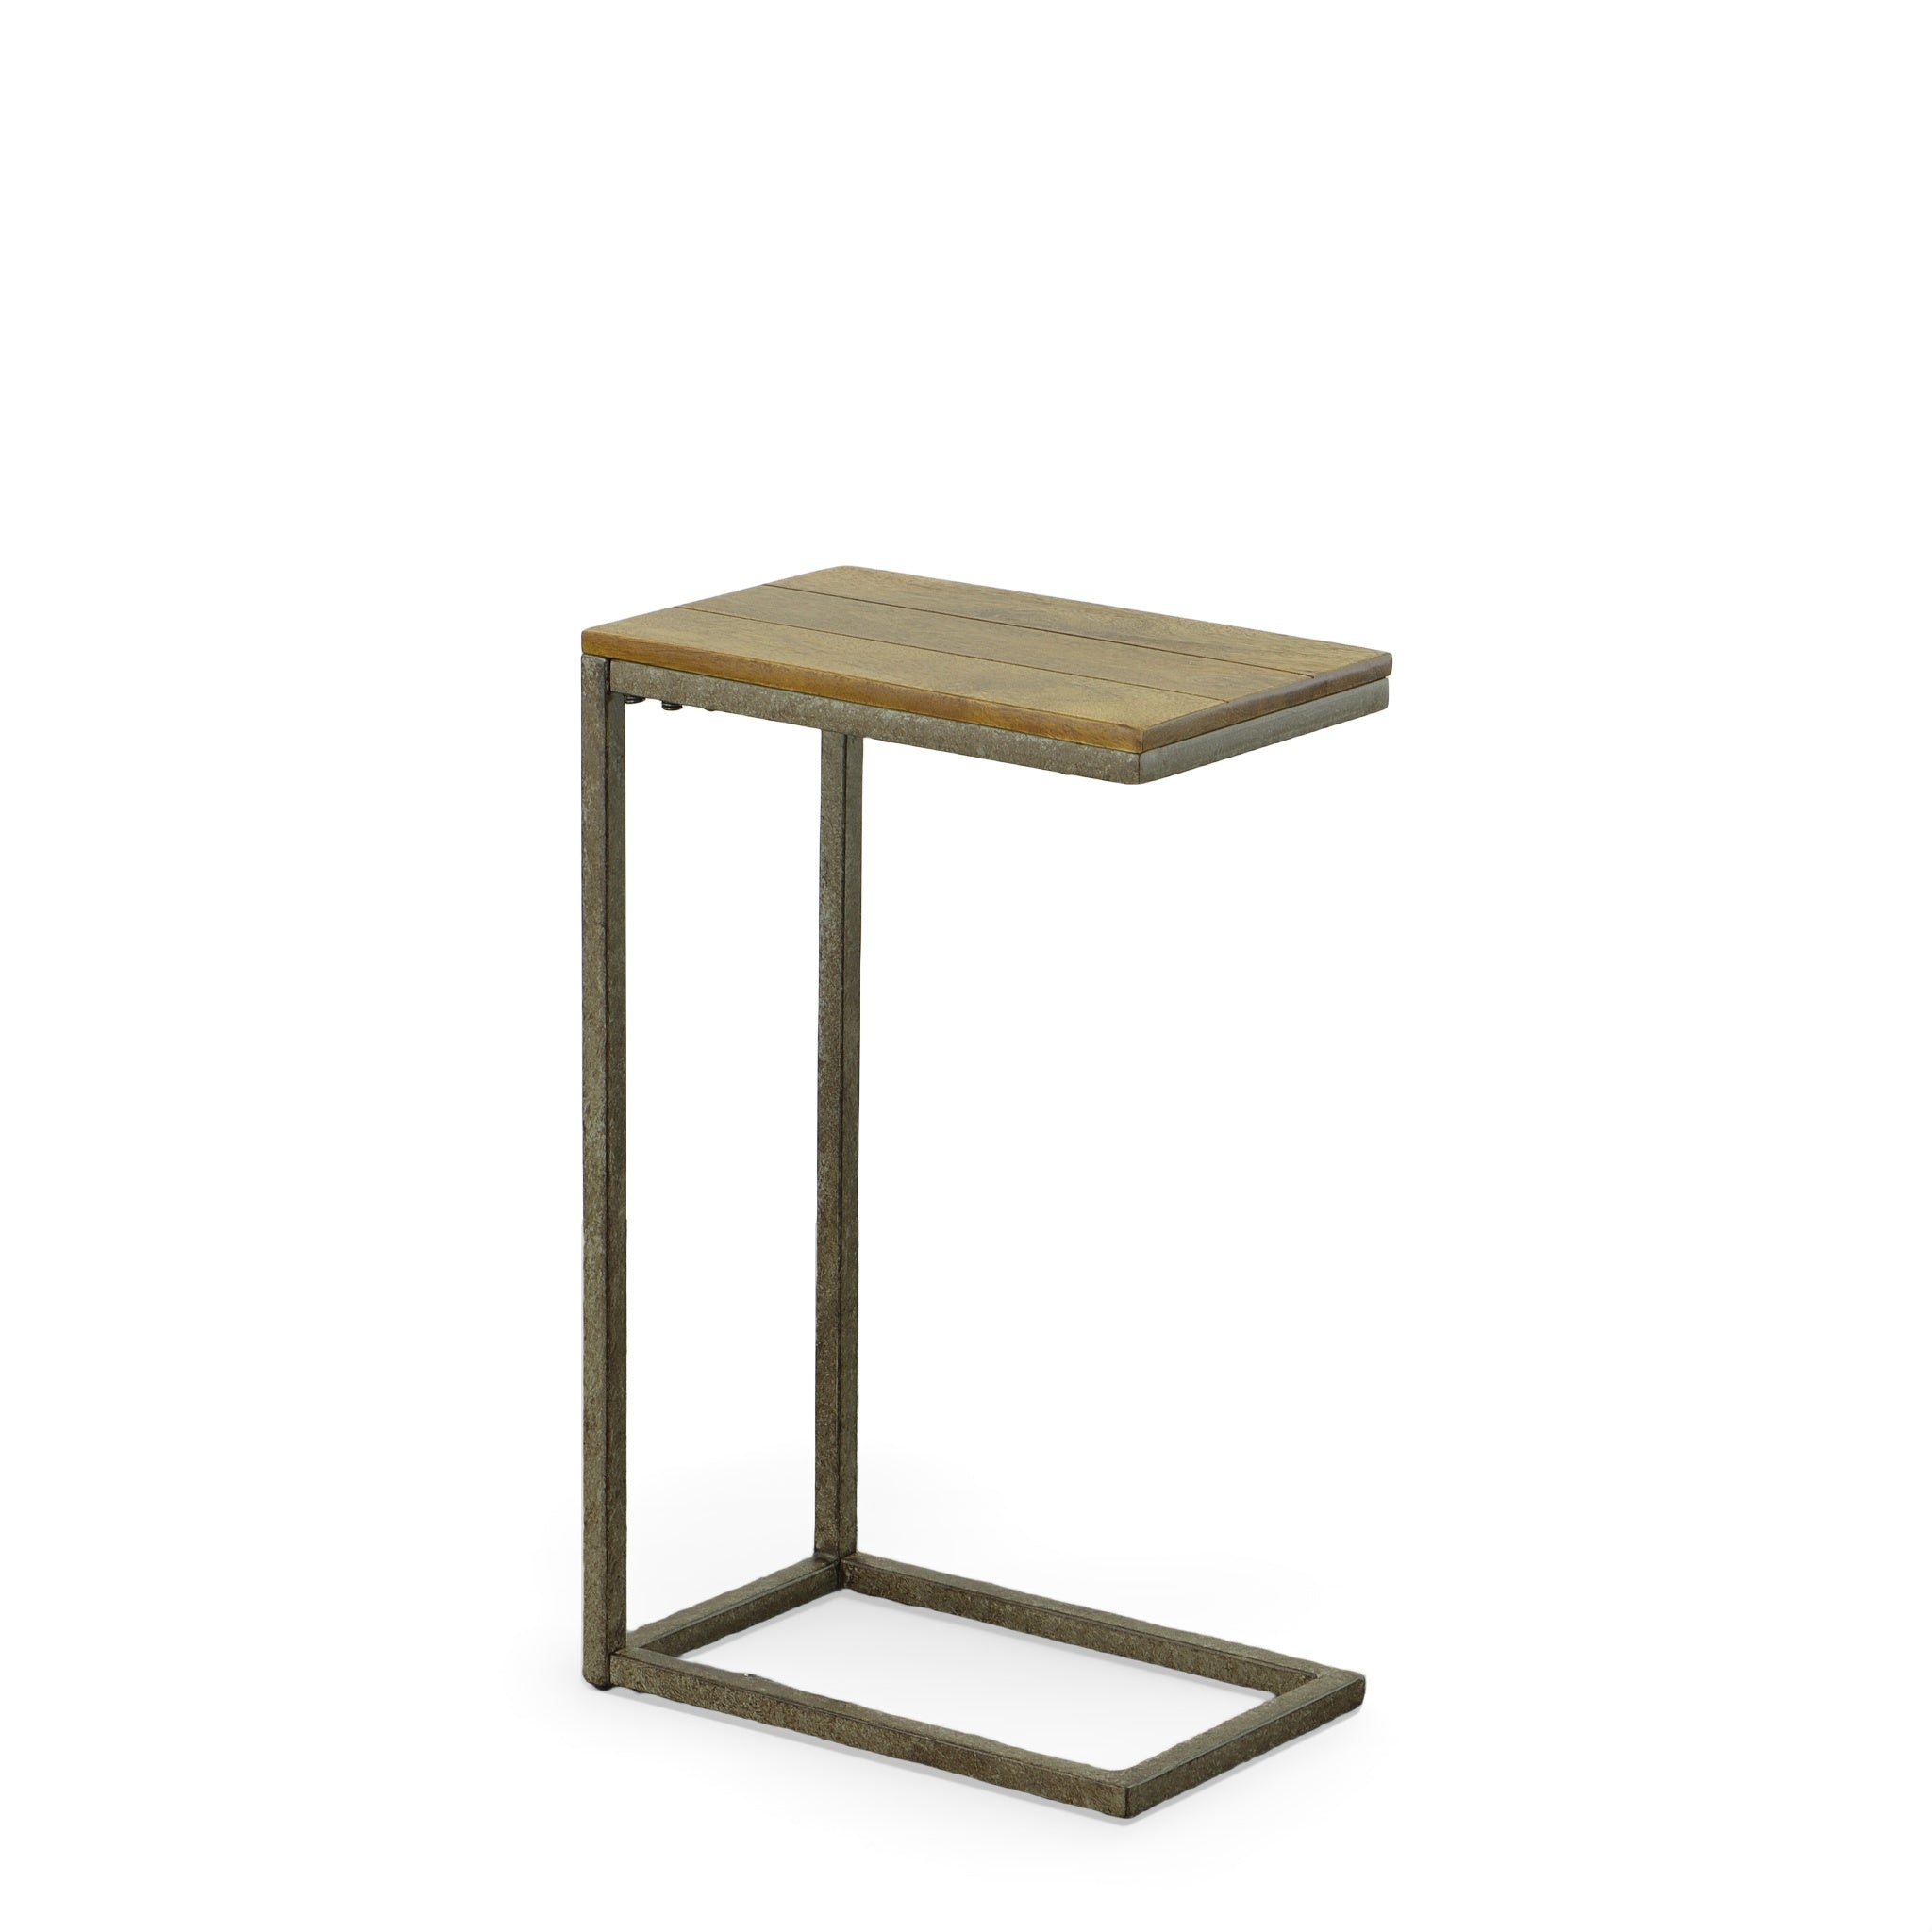 Aggie C-Form Accent Table - Side Tables